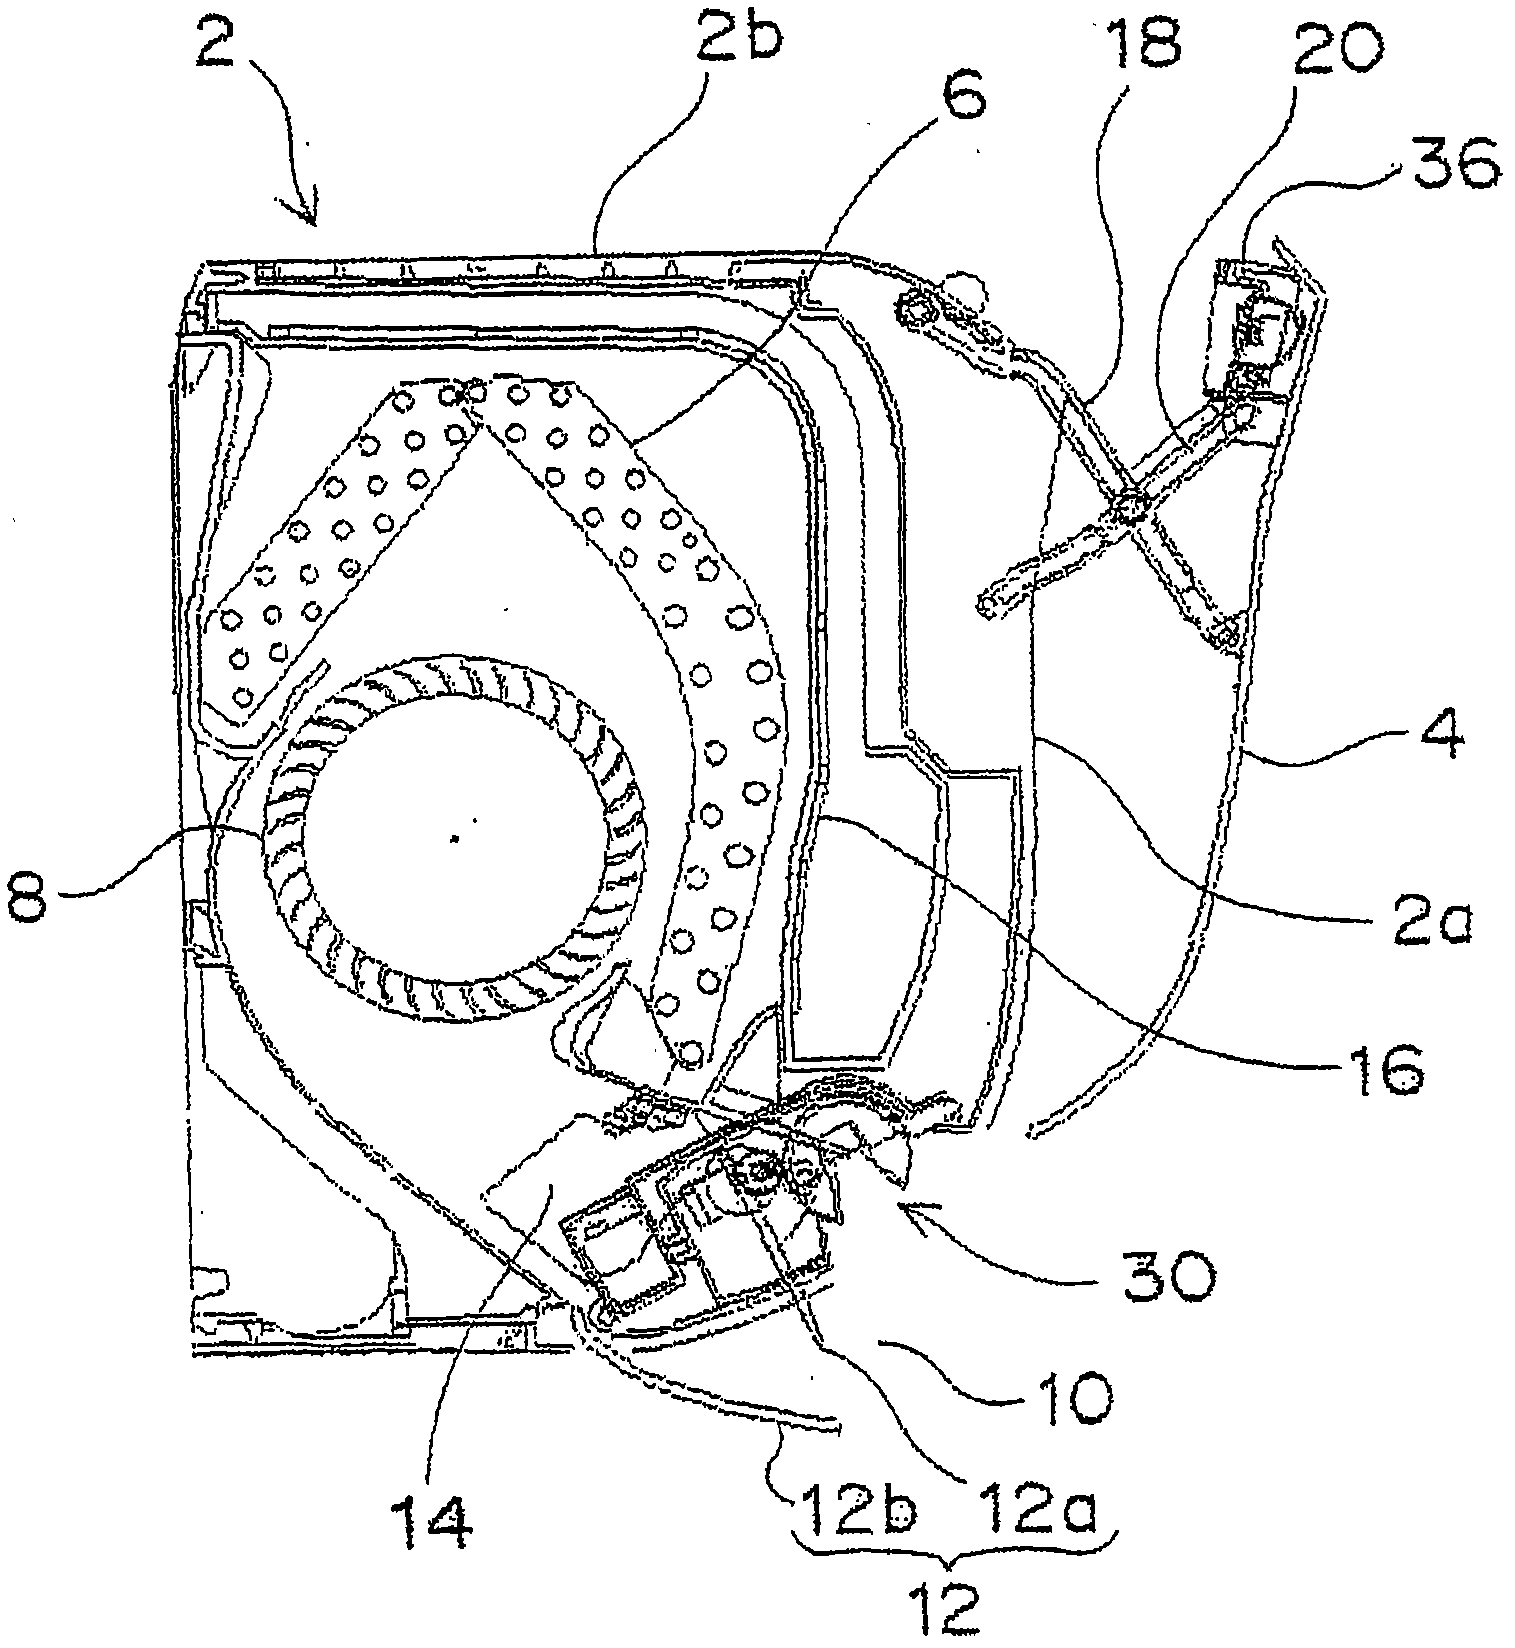 Air conditioner indoor unit with human body detection device and obstacle detection device for wind direction control